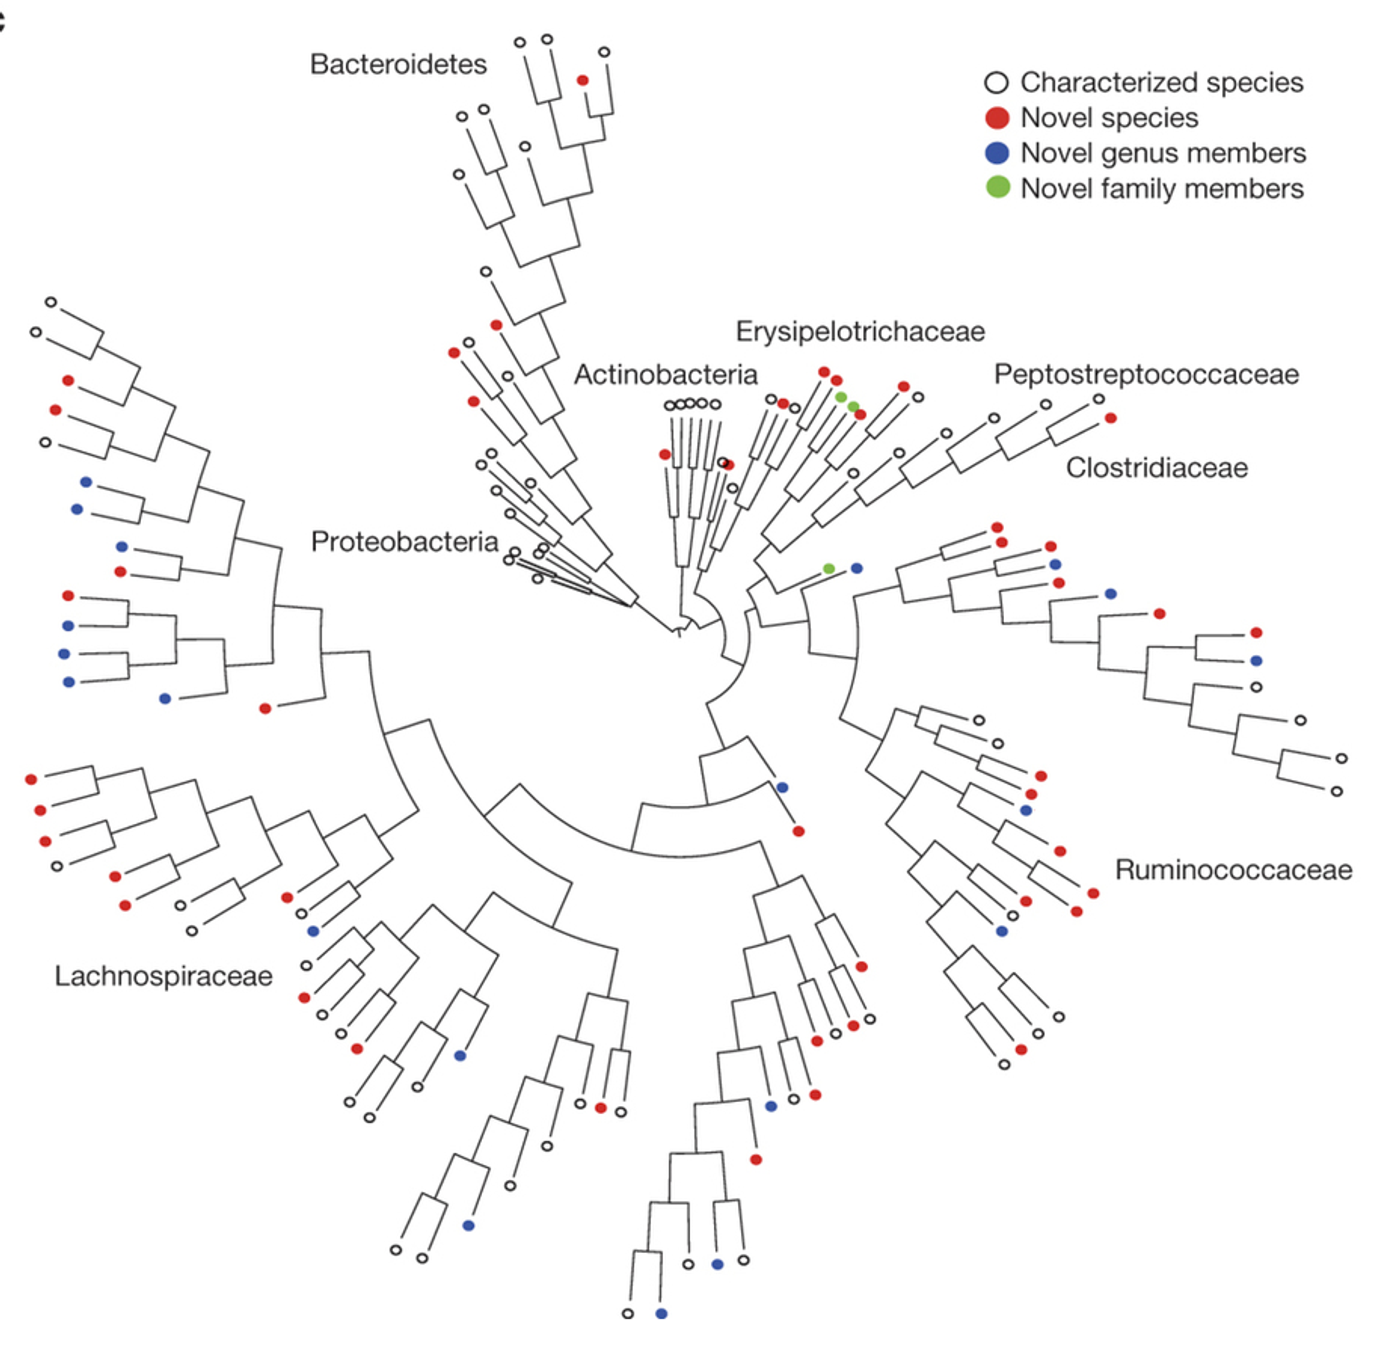 Phylogenetic tree of bacteria cultured from the six donors constructed from full-length 16S rRNA gene sequences. Novel candidate species (red), genera (blue) and families (green) are shown by dot colors. Proteobacteria were not cultured, but were included for context.